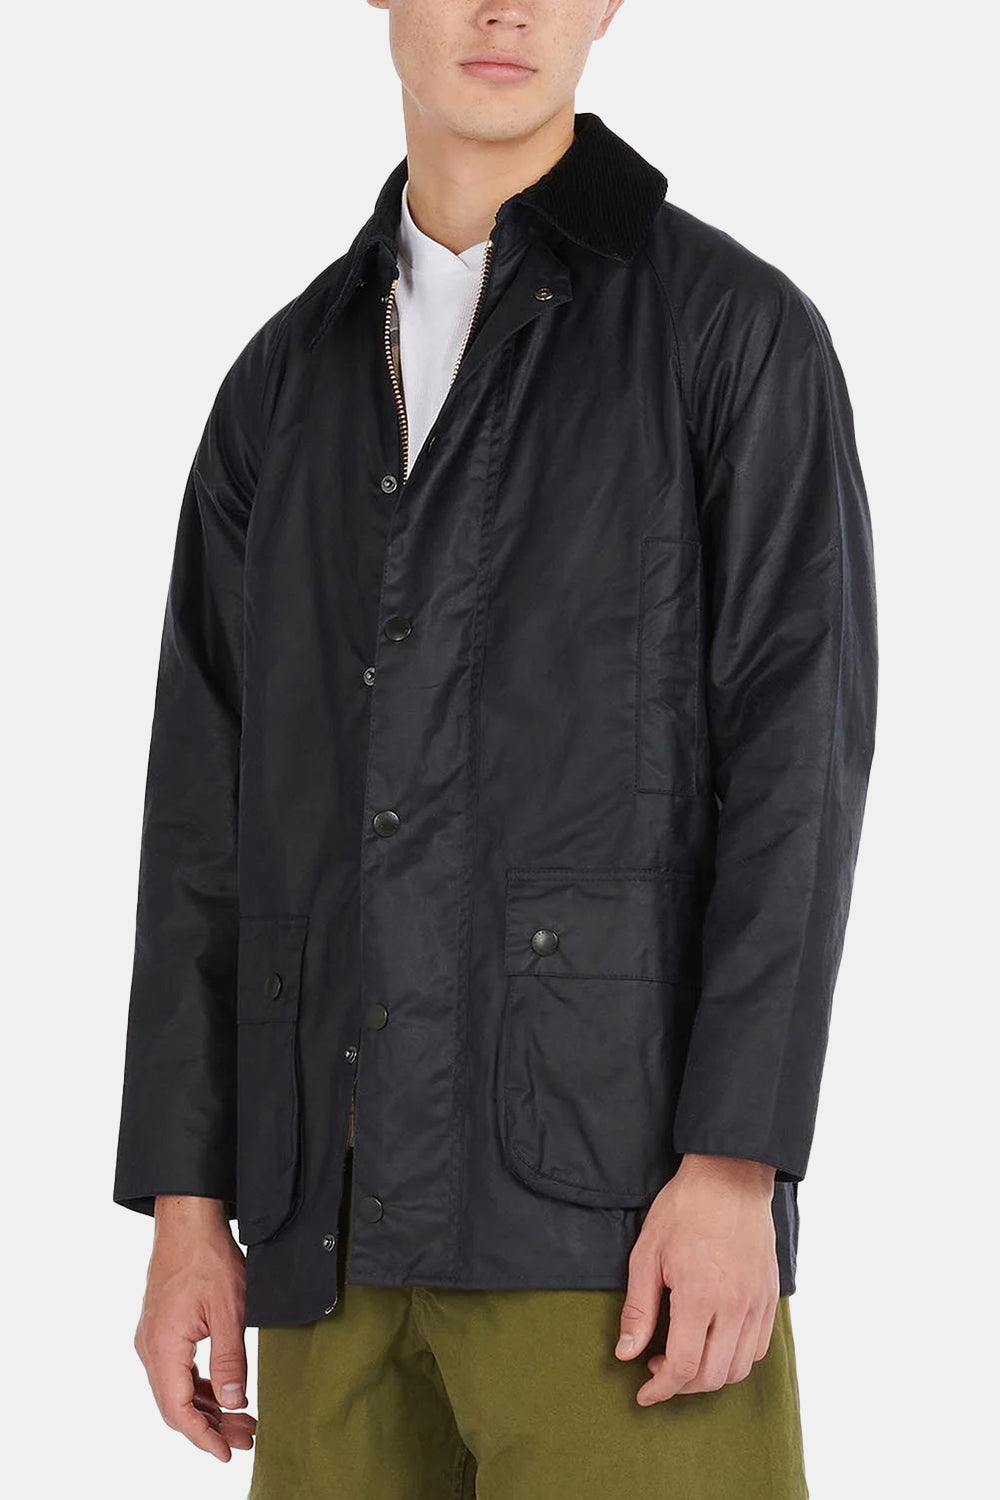 Barbour White Label SL Beaufort Waxed Cotton Jacket (Navy) | Number Six